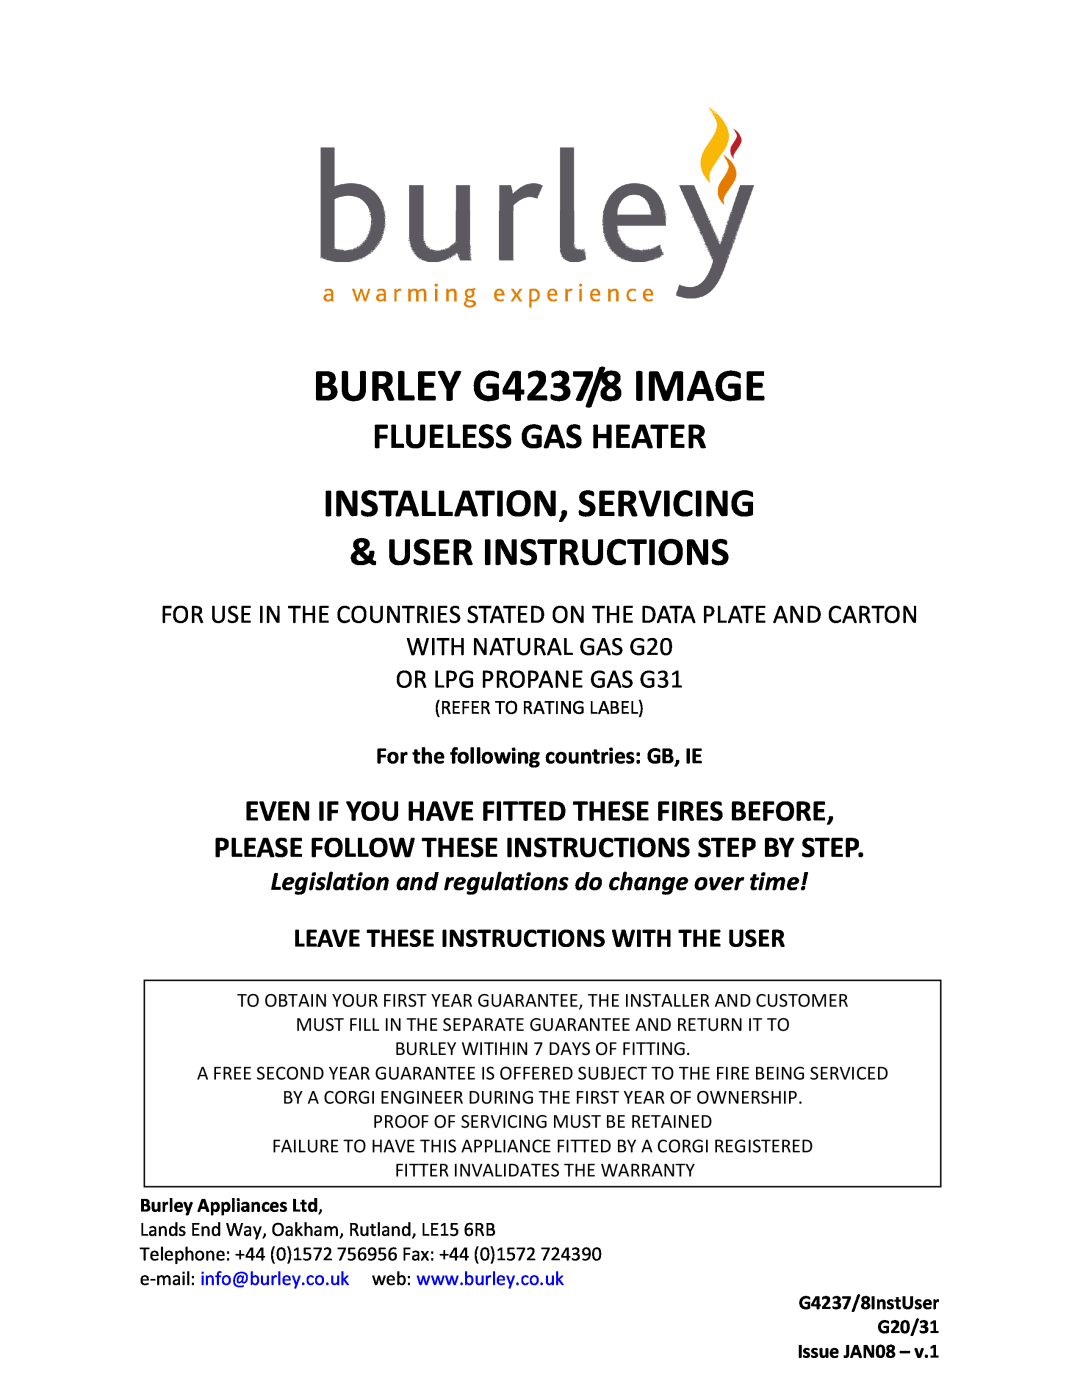 Burley G4237/8 warranty Even If You Have Fitted These Fires Before, Please Follow These Instructions Step By Step 